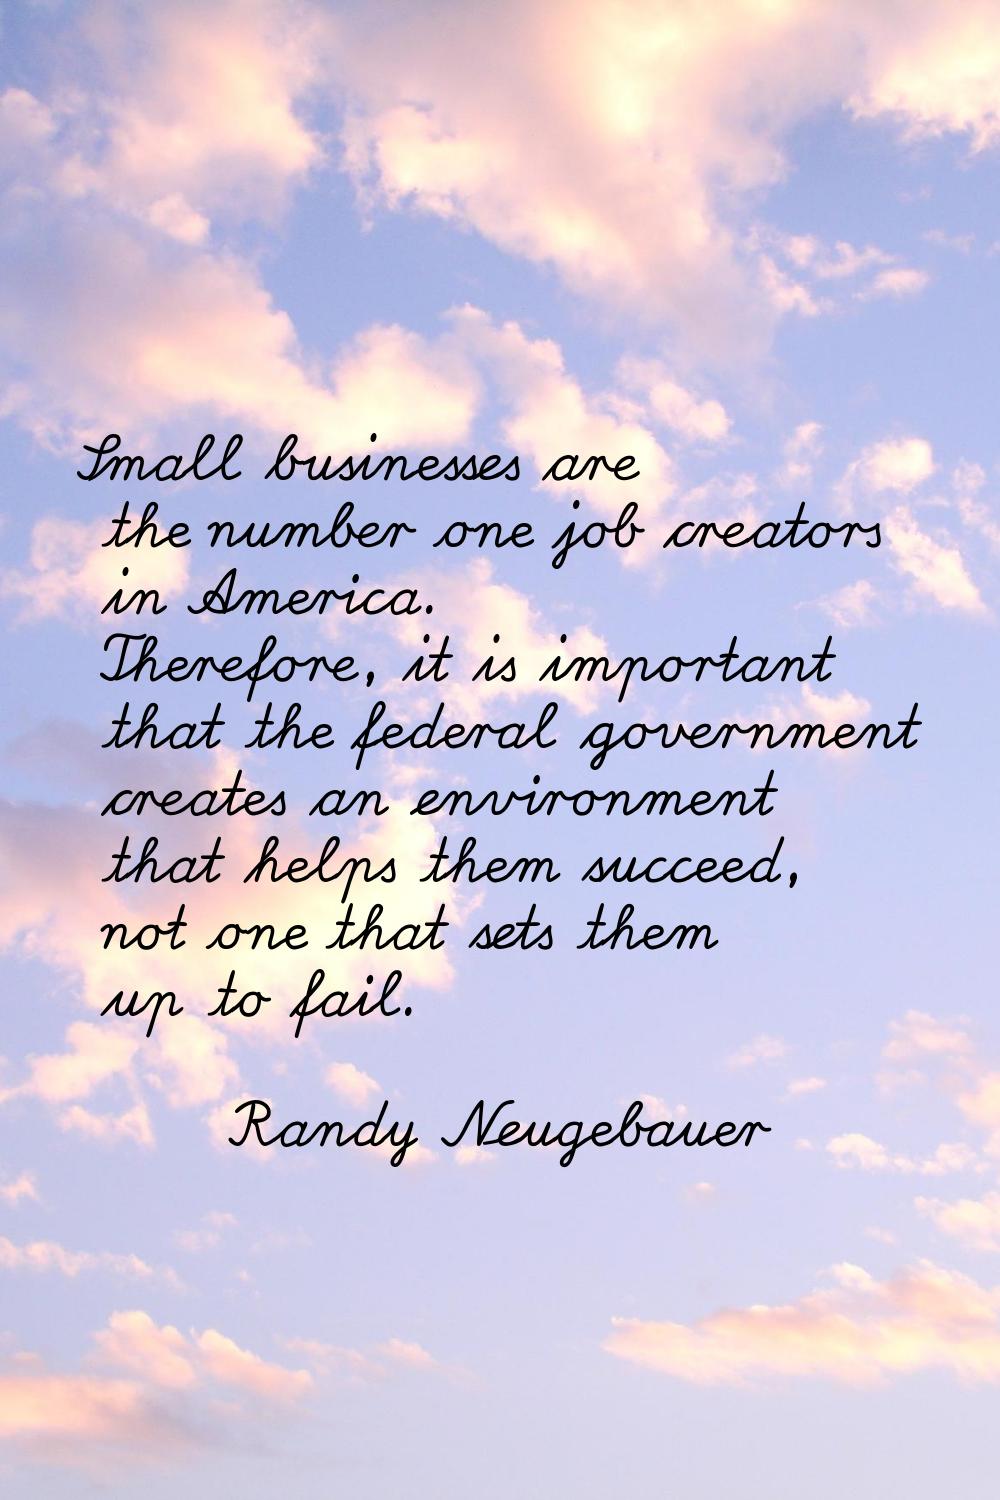 Small businesses are the number one job creators in America. Therefore, it is important that the fe